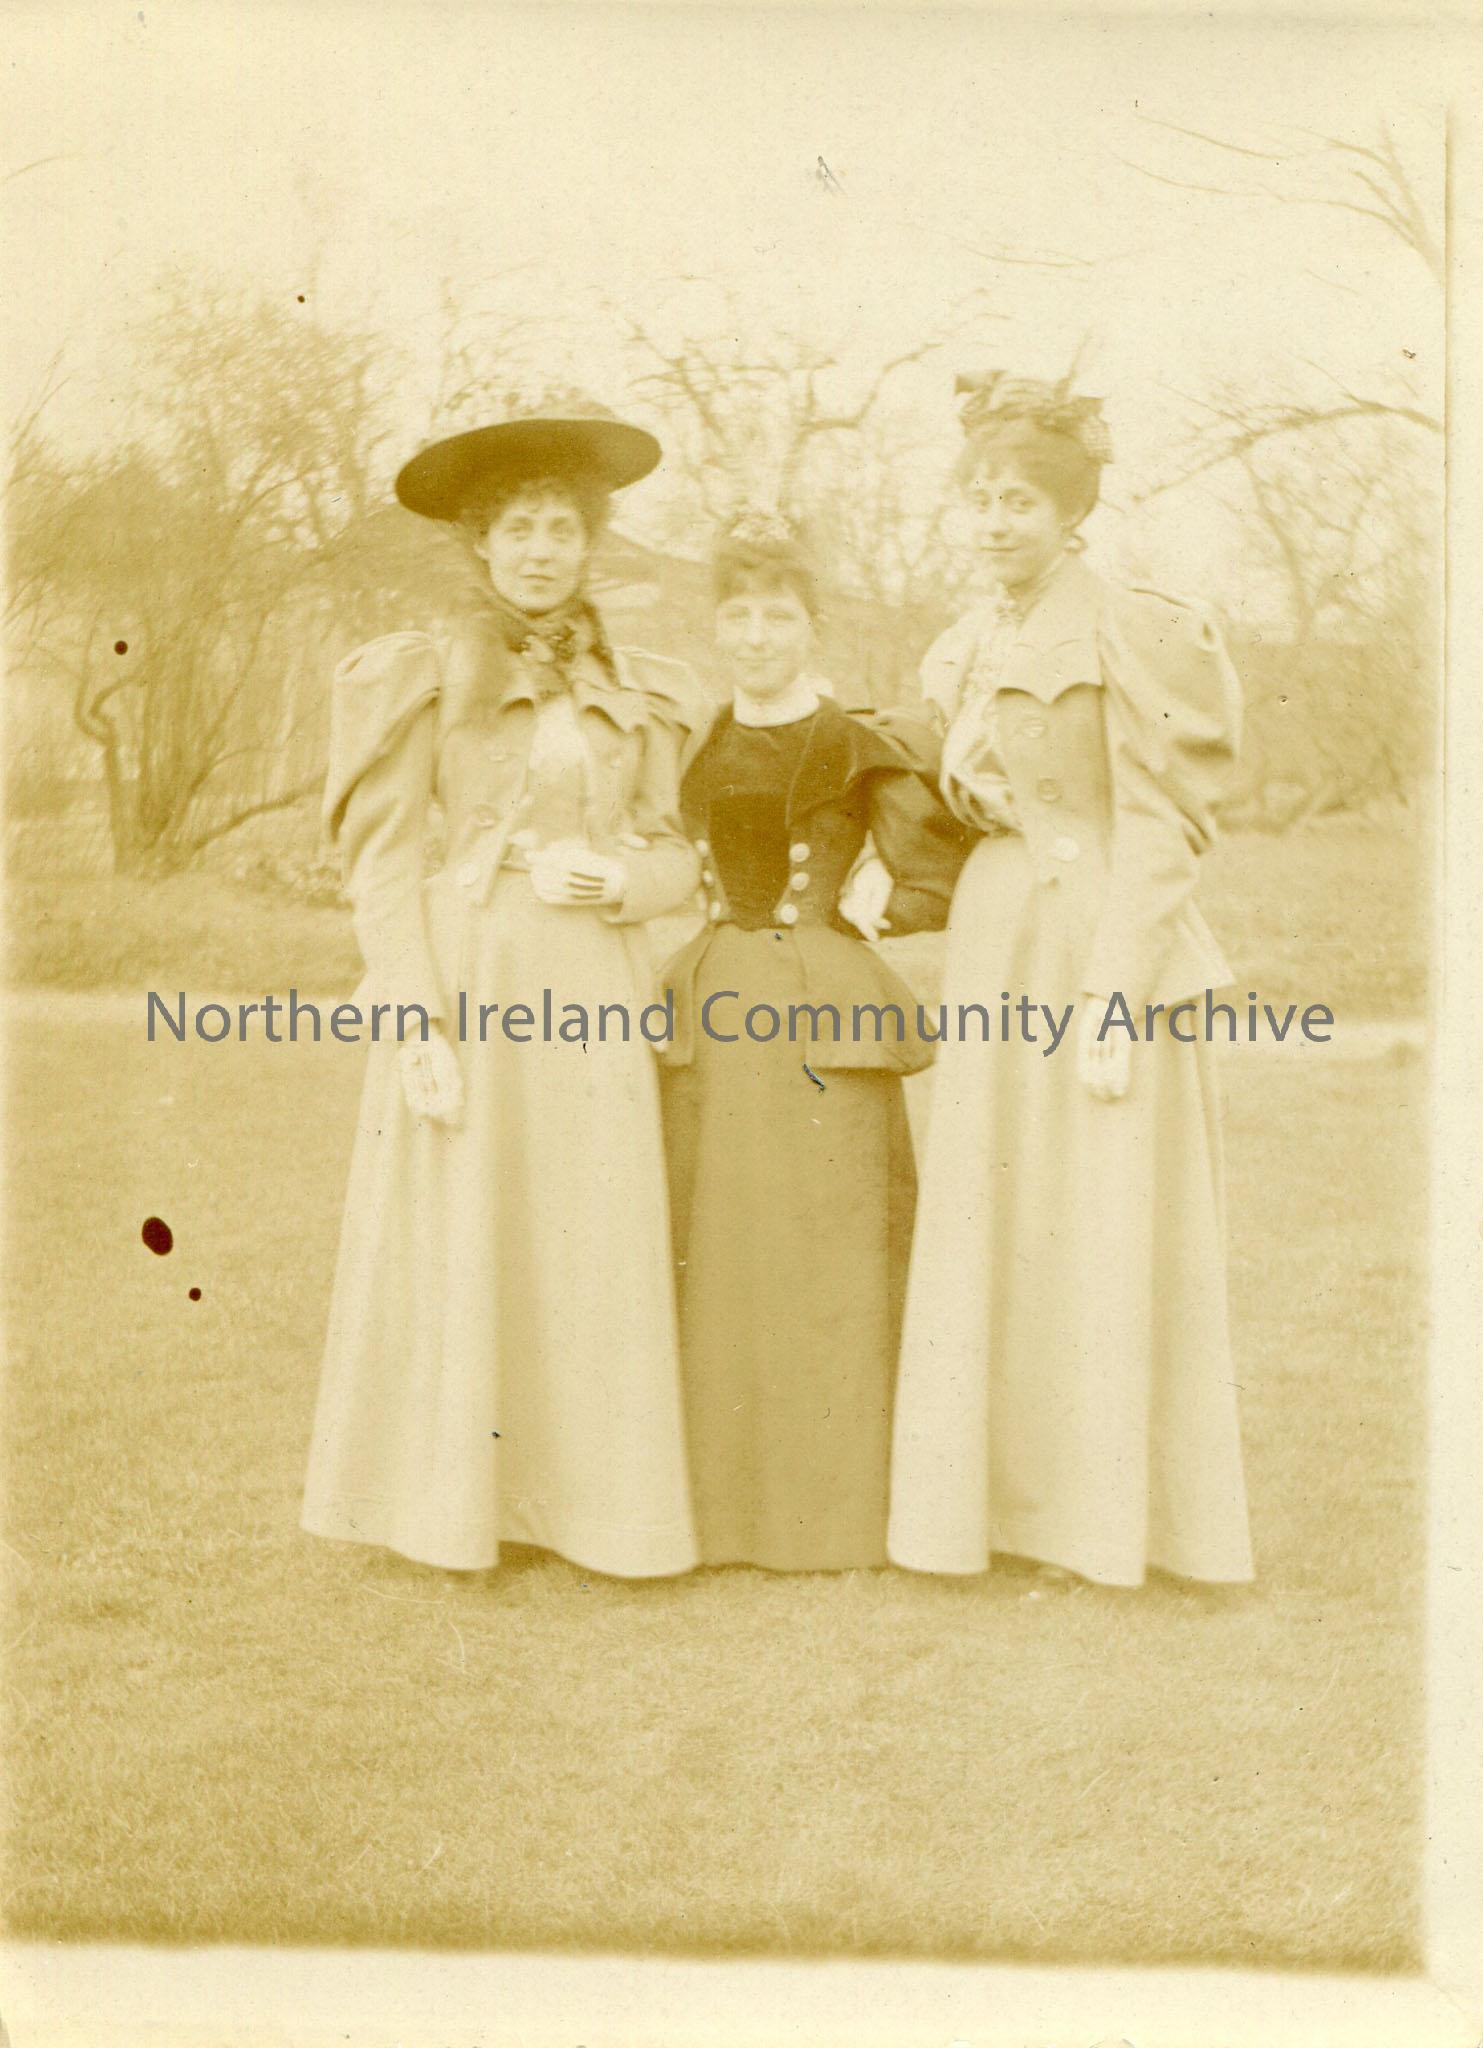 Black and white photograph of three women interlinking arms standing on grass. Trees with no leaves in background.